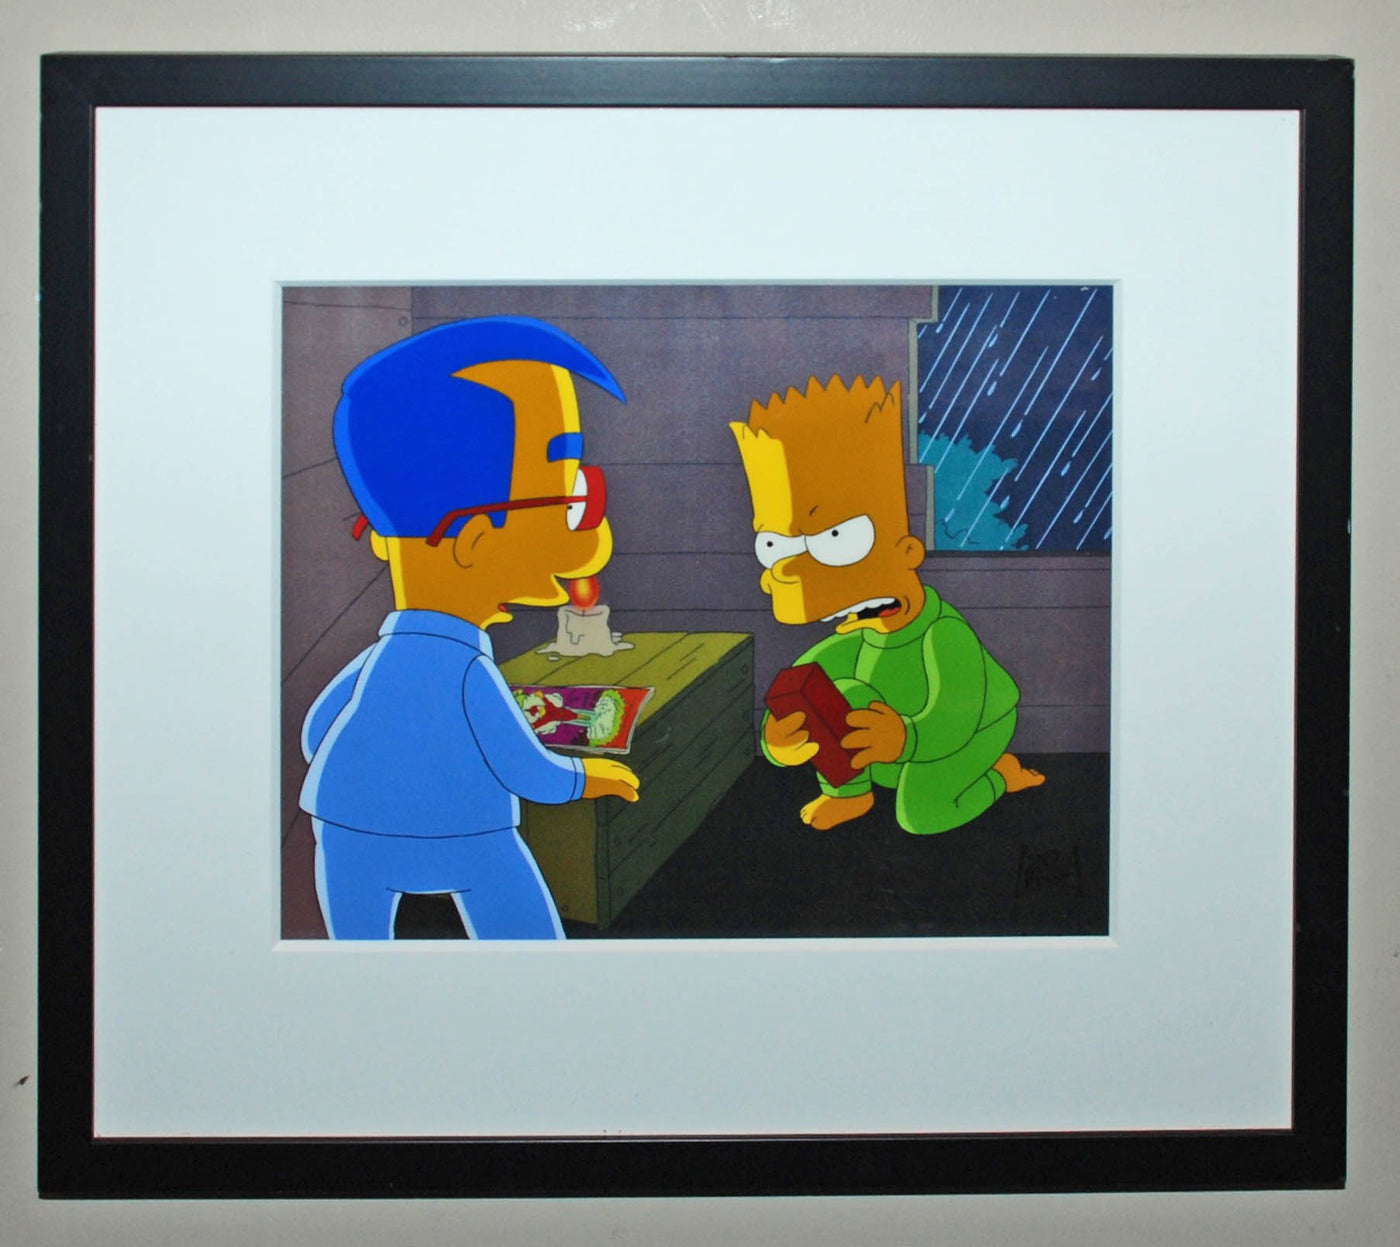 Original Simpsons Production Cel from the Simpsons featuring Bart and Milhouse